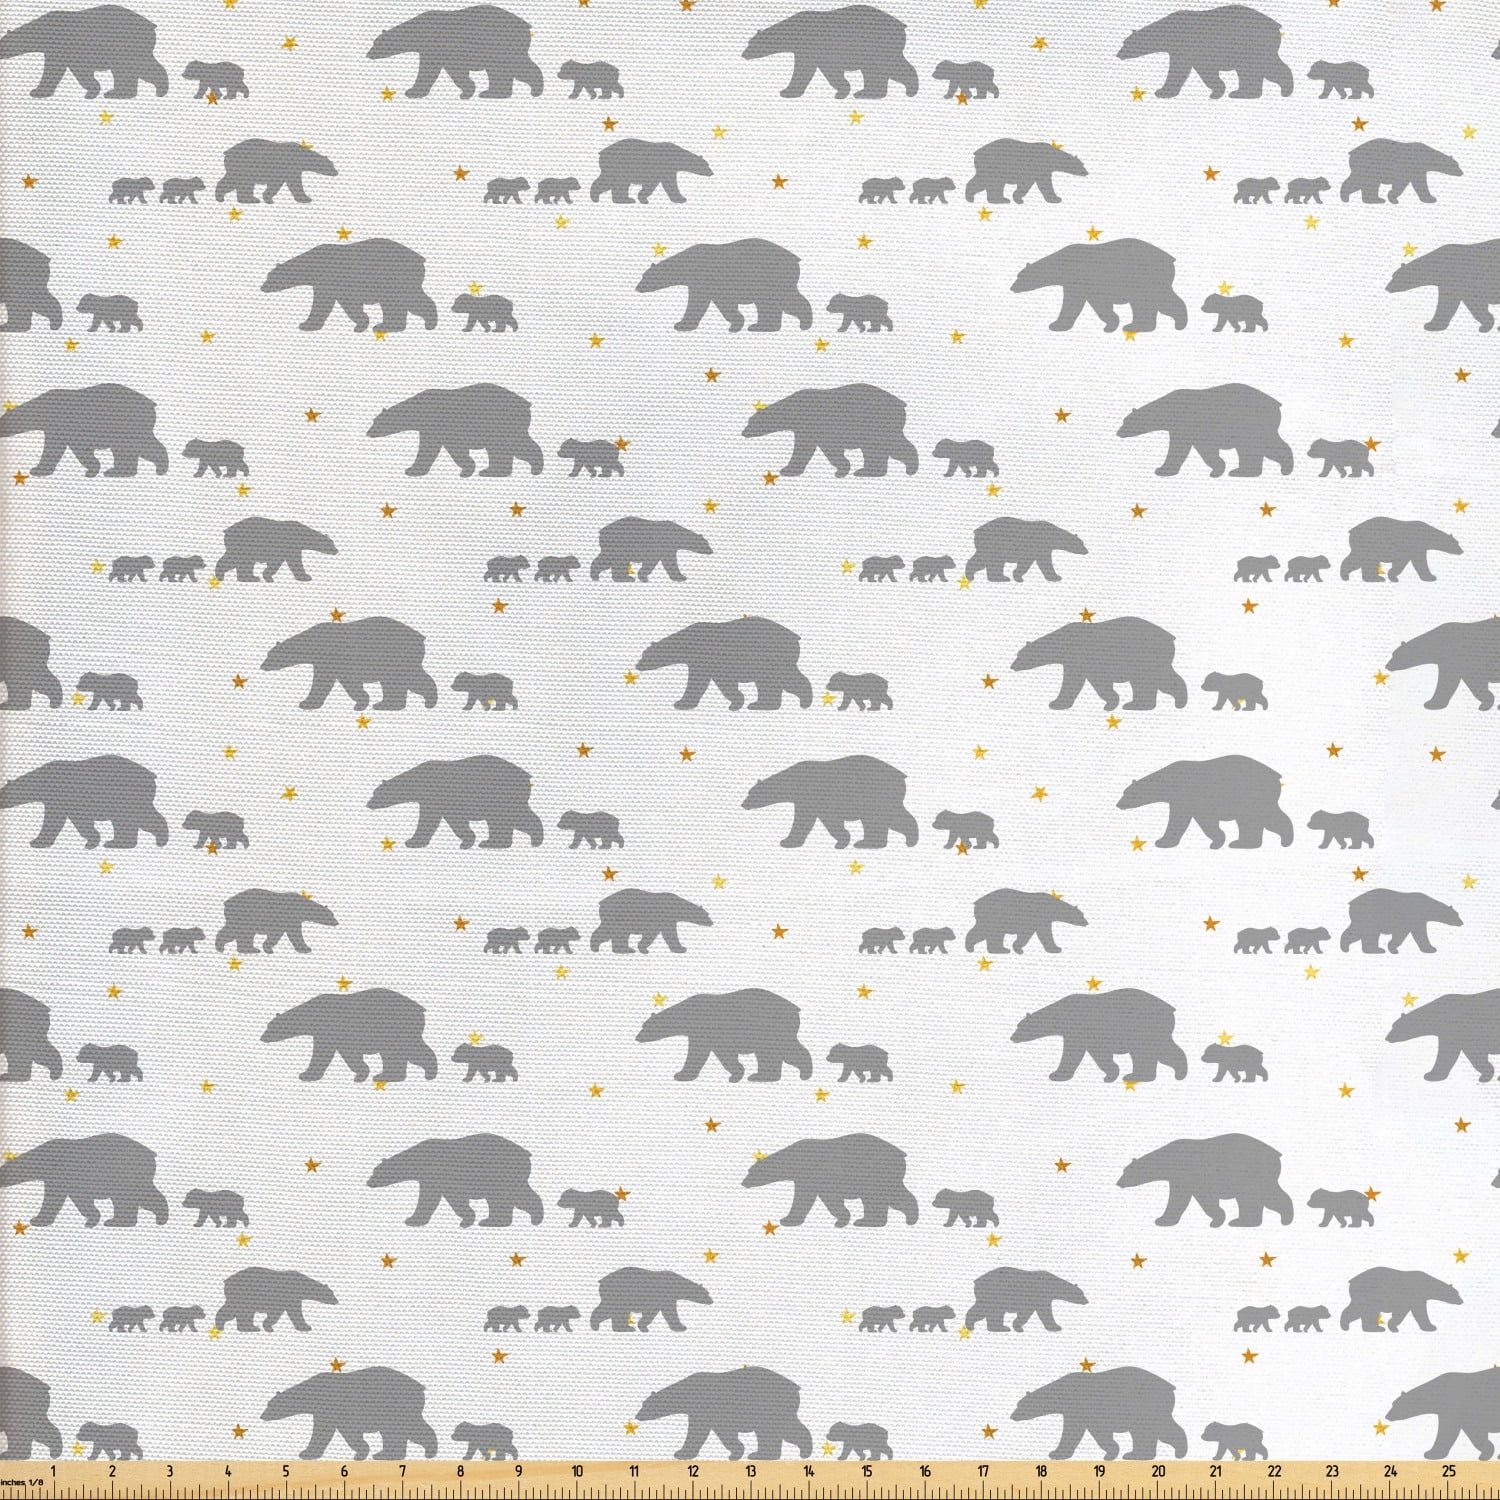 Polar Bear Fabric by The Yard, Grey Silhouettes of Mother and Child ...